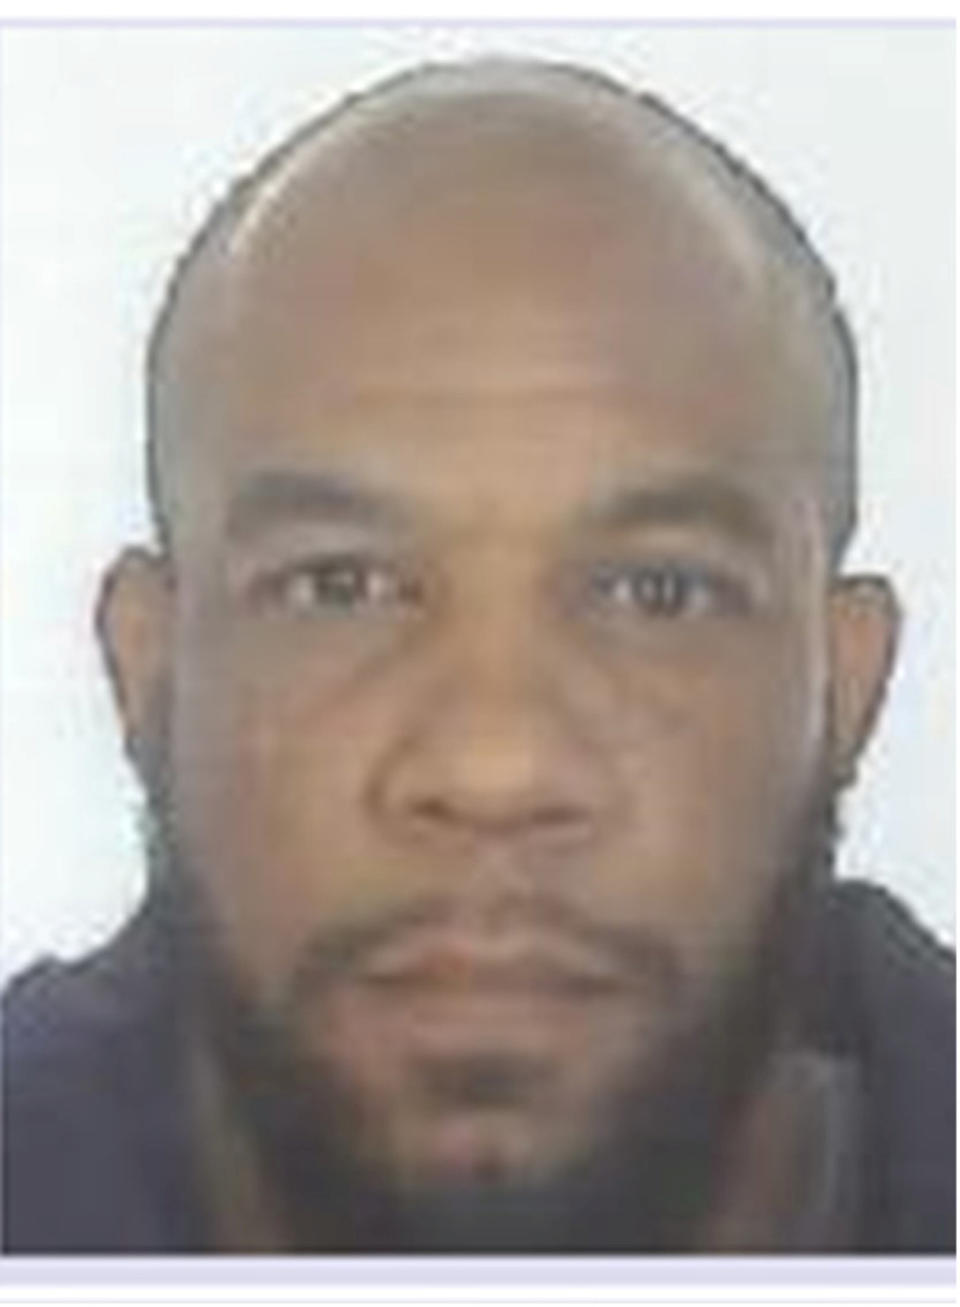 A handout photograph released by the Metropolitan Police shows a mugshot of Khalid Masood, received in London, Britain March 24, 2017. REUTERS/Metropolitan Police/Handout NO SALES. FOR EDITORIAL USE ONLY. NOT FOR SALE FOR MARKETING OR ADVERTISING CAMPAIGNS.